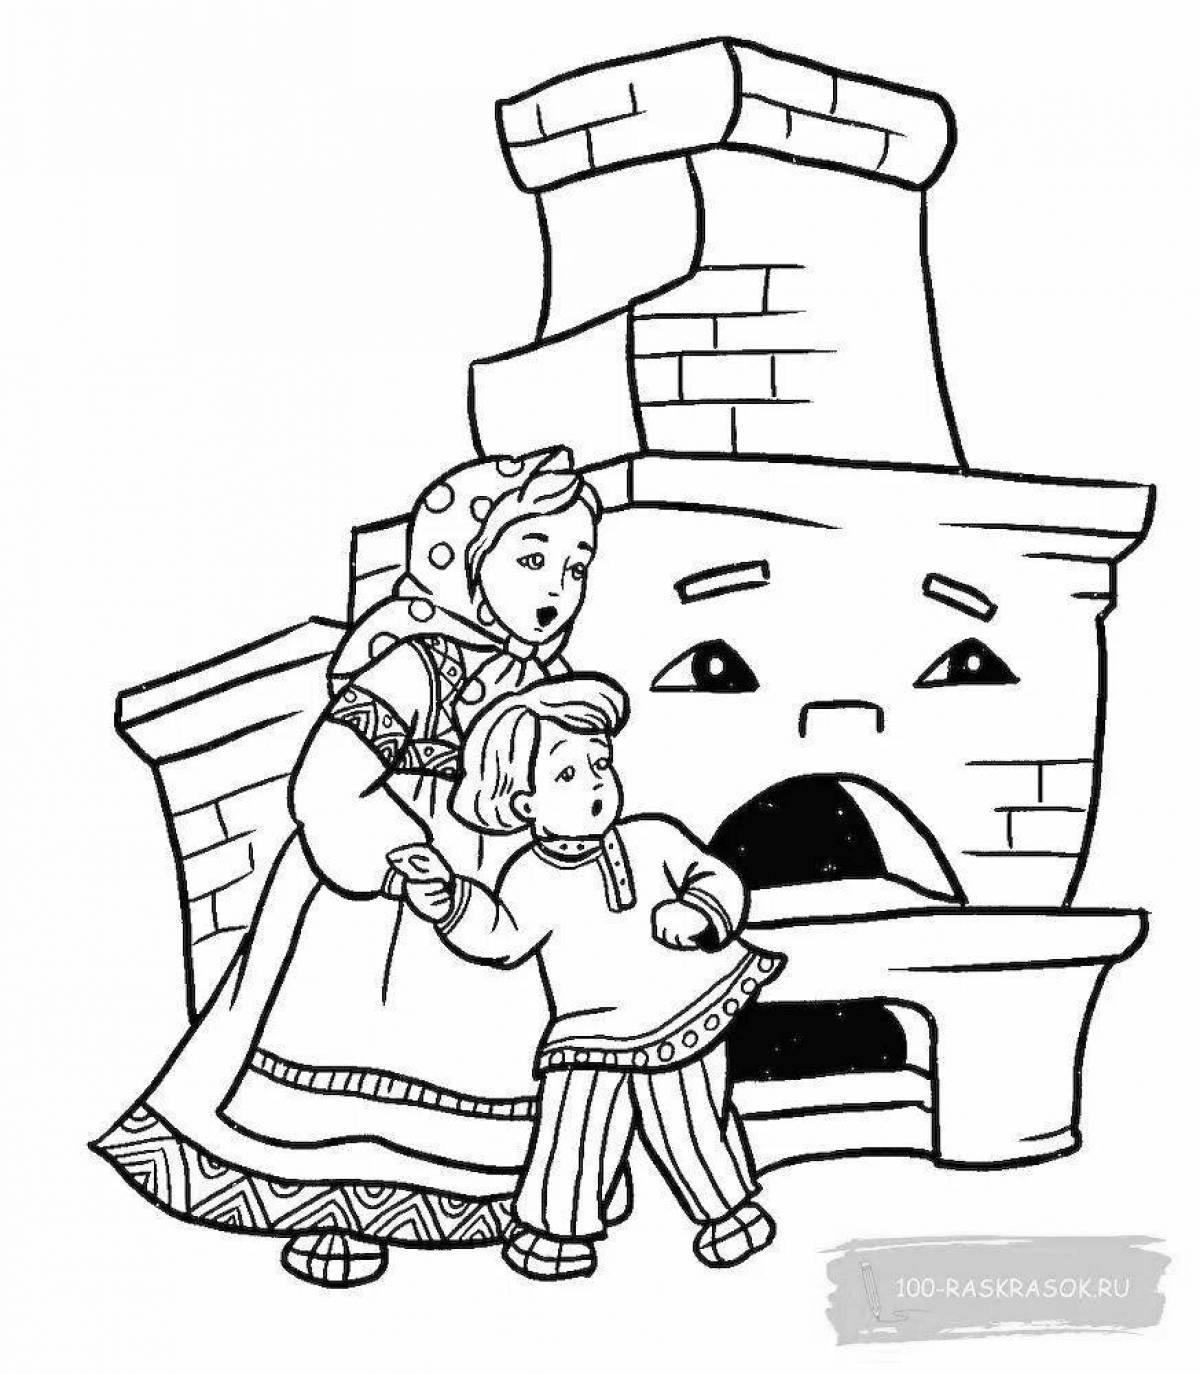 Colorful oven coloring page for kids